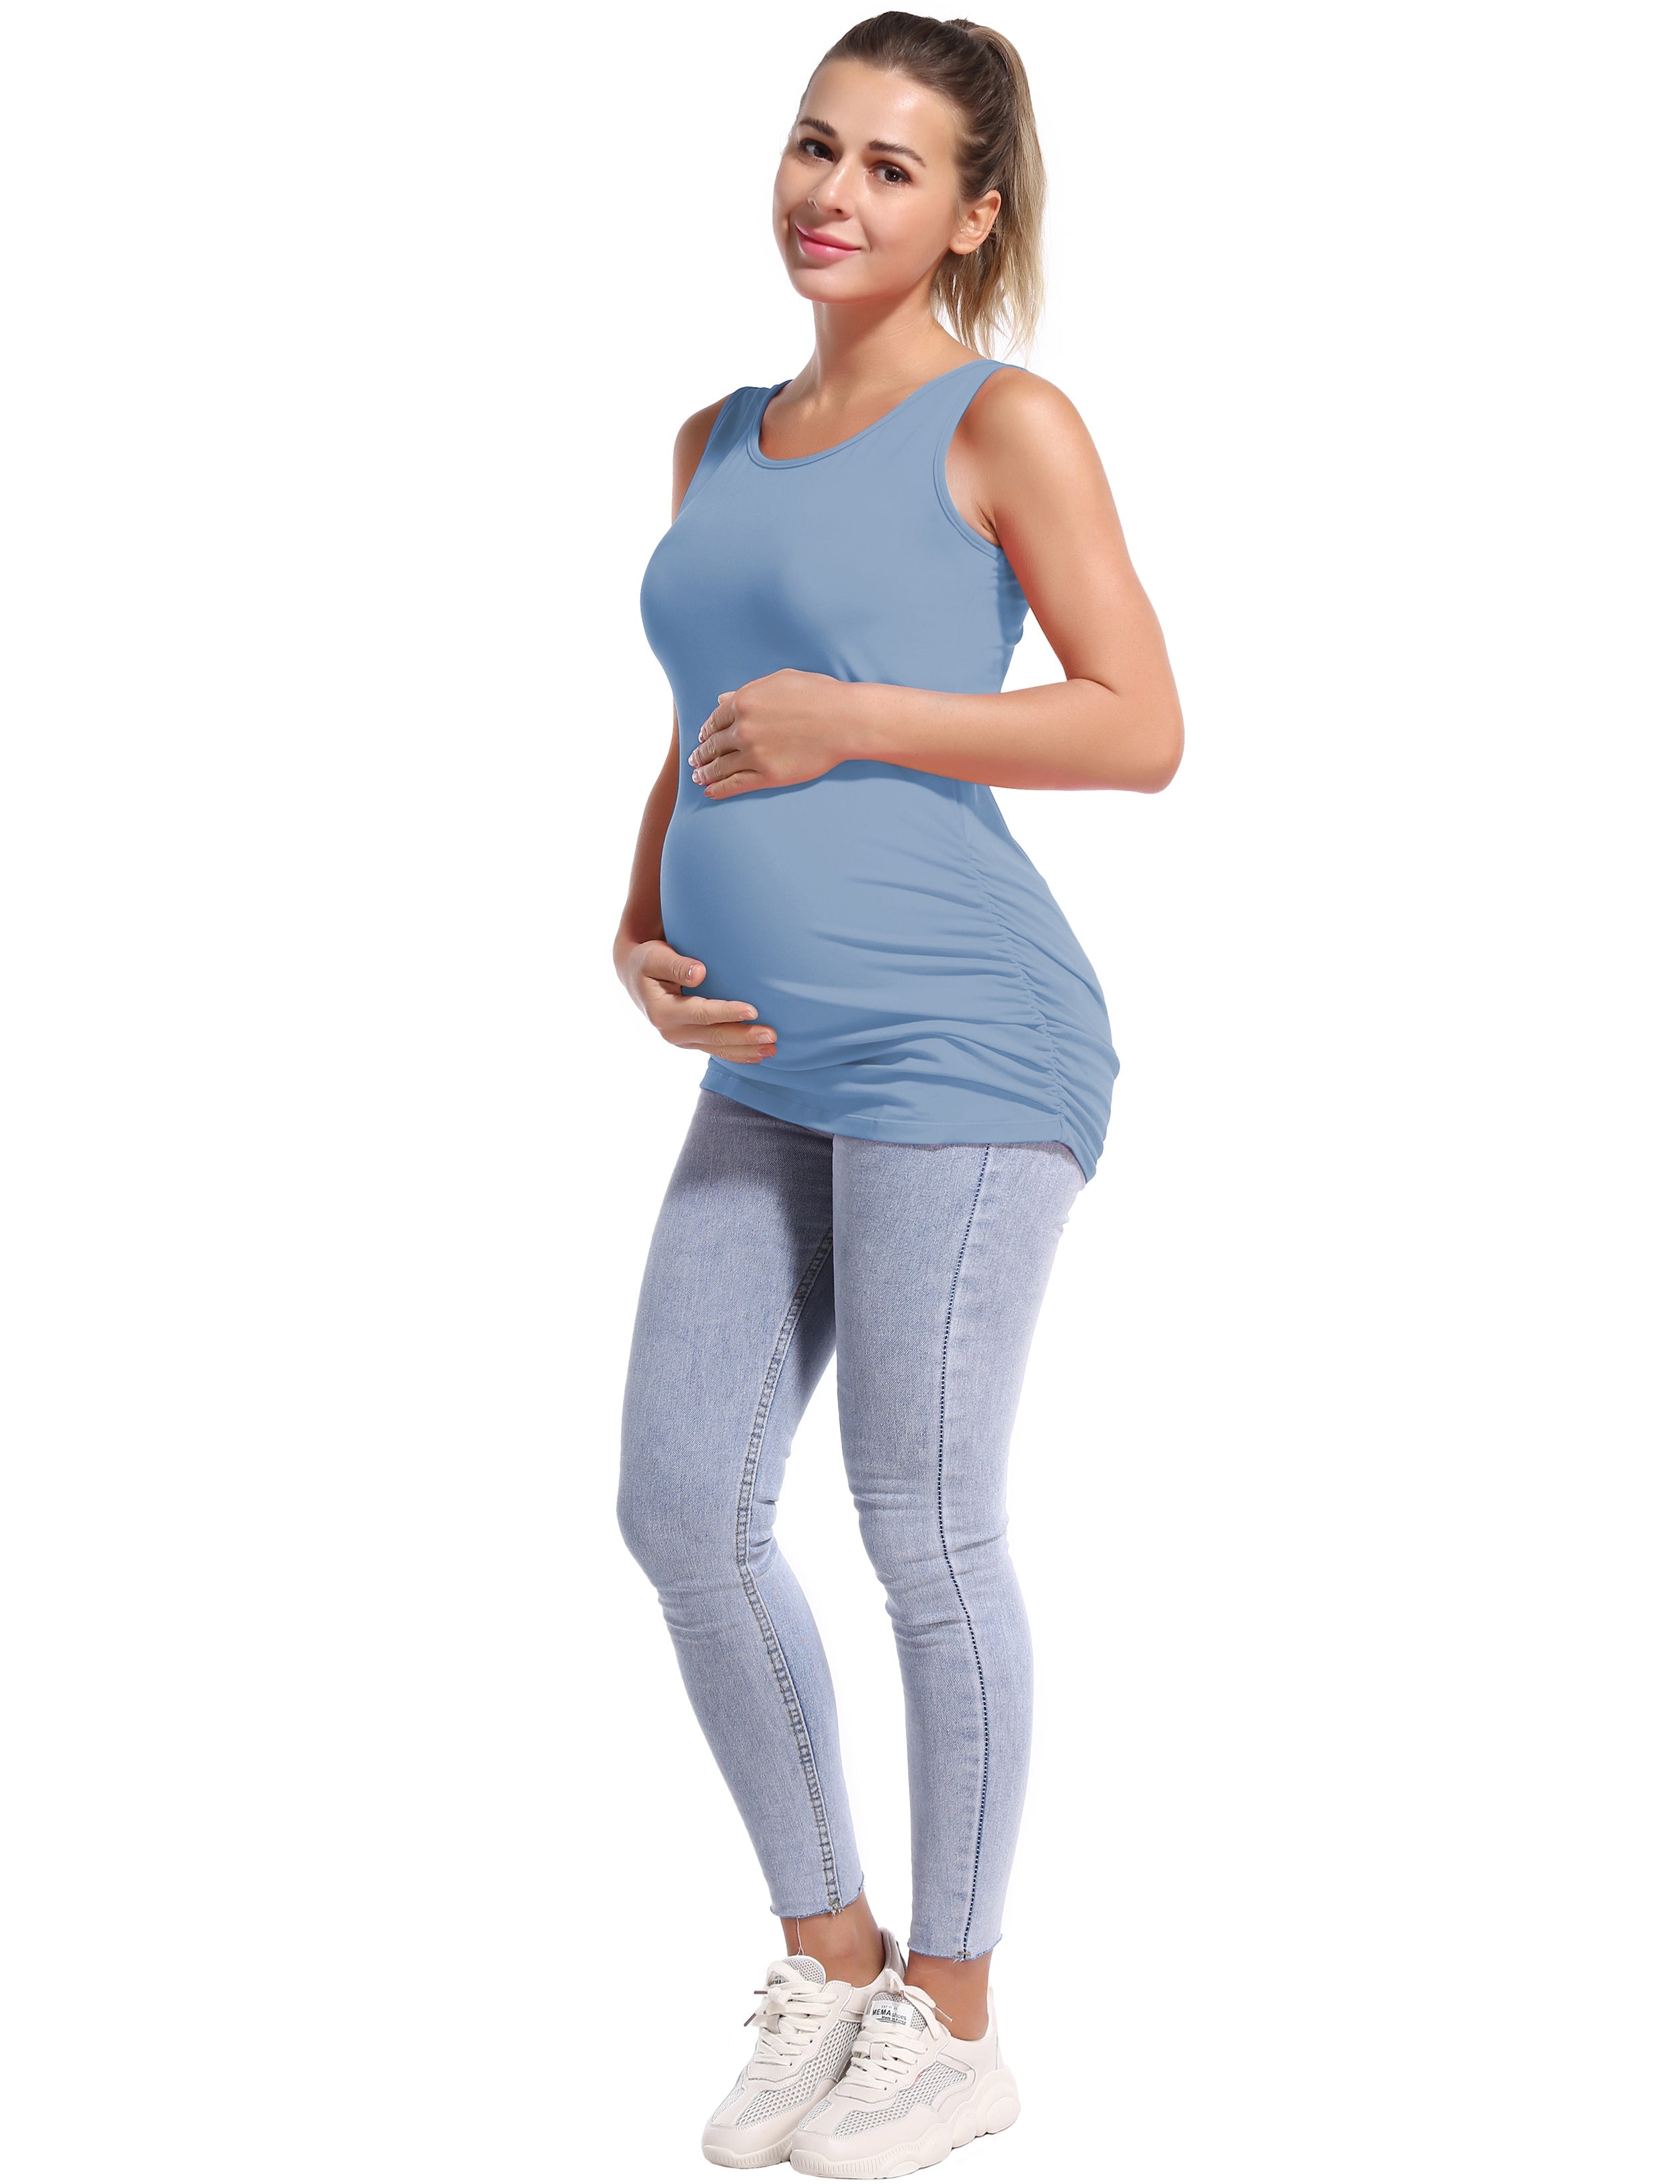 Maternity Side Shirred Tank Top electricblue 92%Nylon/8%Spandex(Cotton Soft) Designed for Maternity So buttery soft, it feels weightless Sweat-wicking Four-way stretch Breathable Contours your body